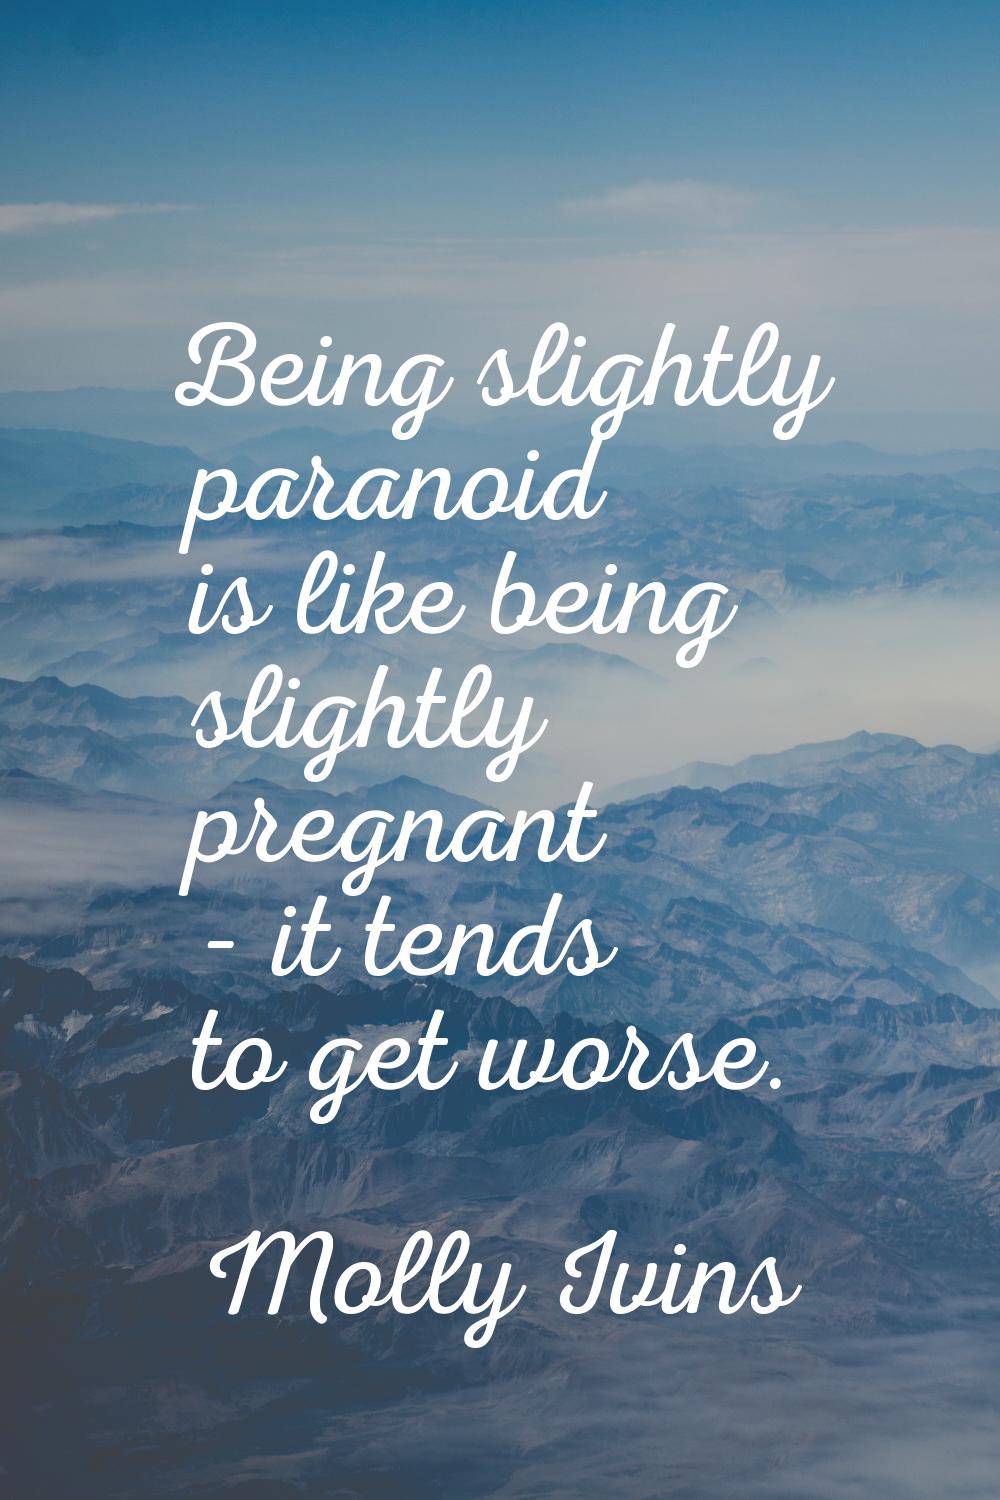 Being slightly paranoid is like being slightly pregnant - it tends to get worse.